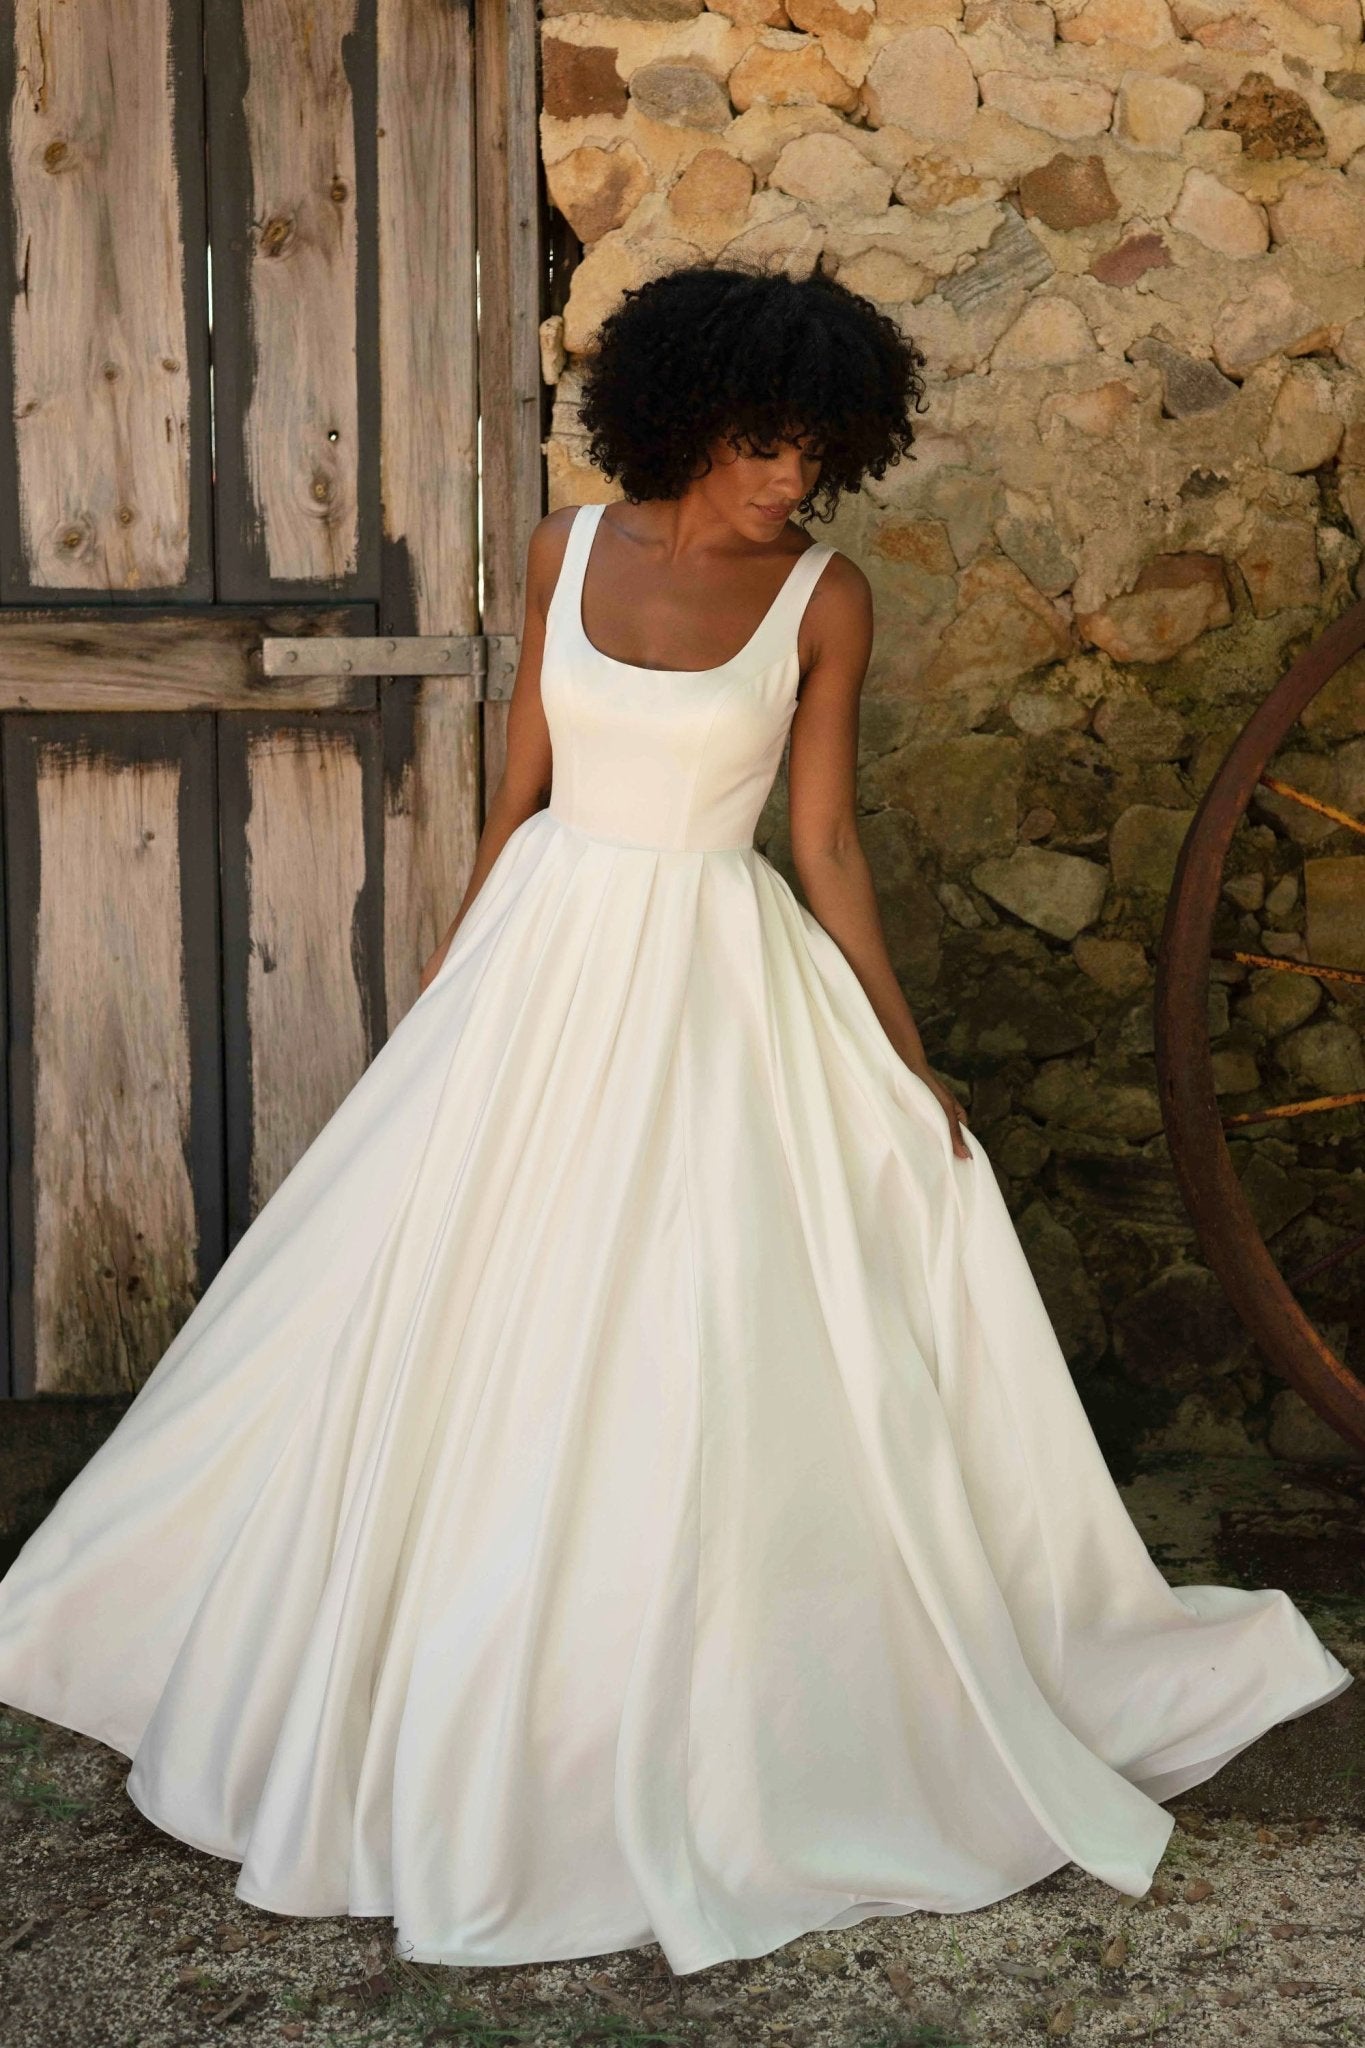 Square Neck Wedding Dresses: 28 of the Best Styles 